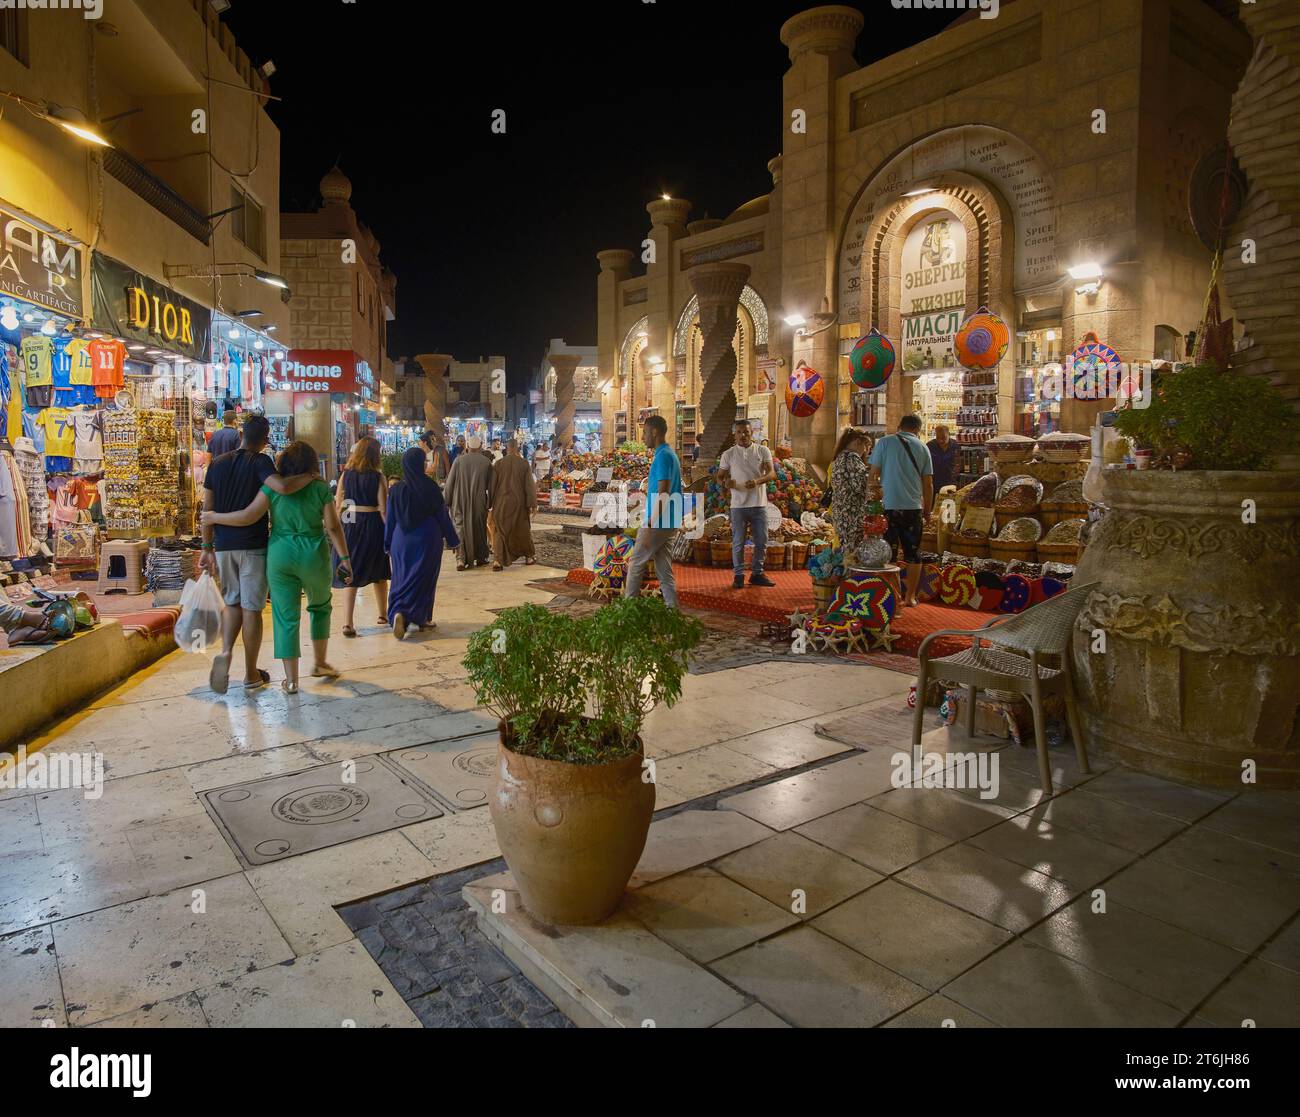 The Old Market in Sharm El Sheikh, Egypt, is a traditional market dating back to ancient times, Night view. Stock Photo